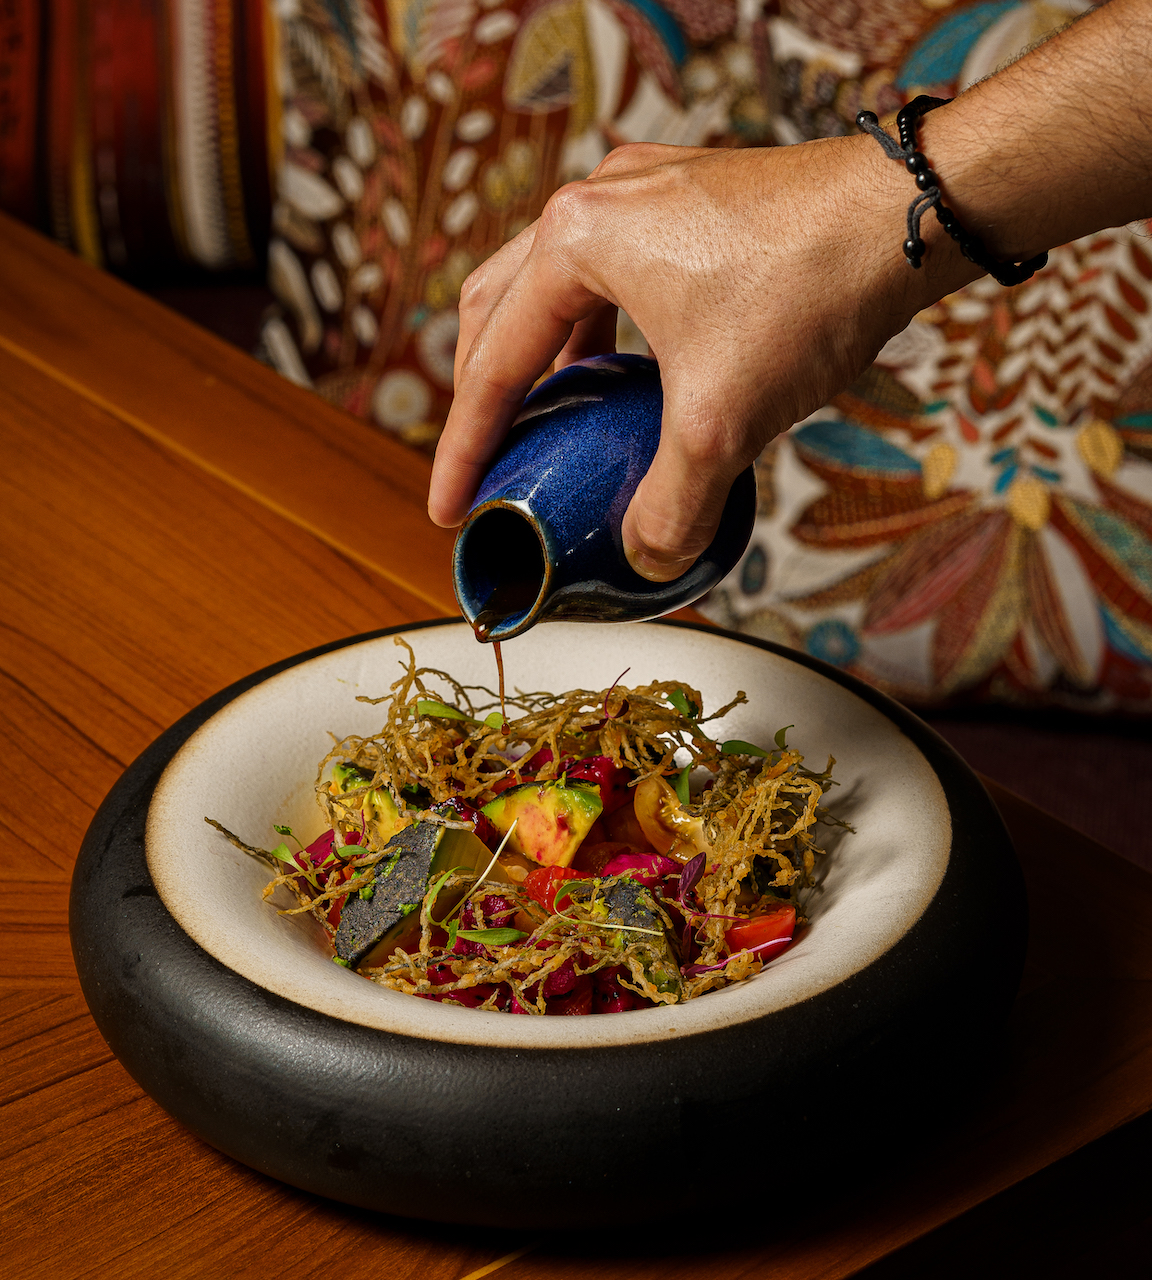 Santana, Bali's newest culinary hotspot, located in the heart of Berawa, combines stunning colonial-esque decor with the vibrant flavours of Latin America.